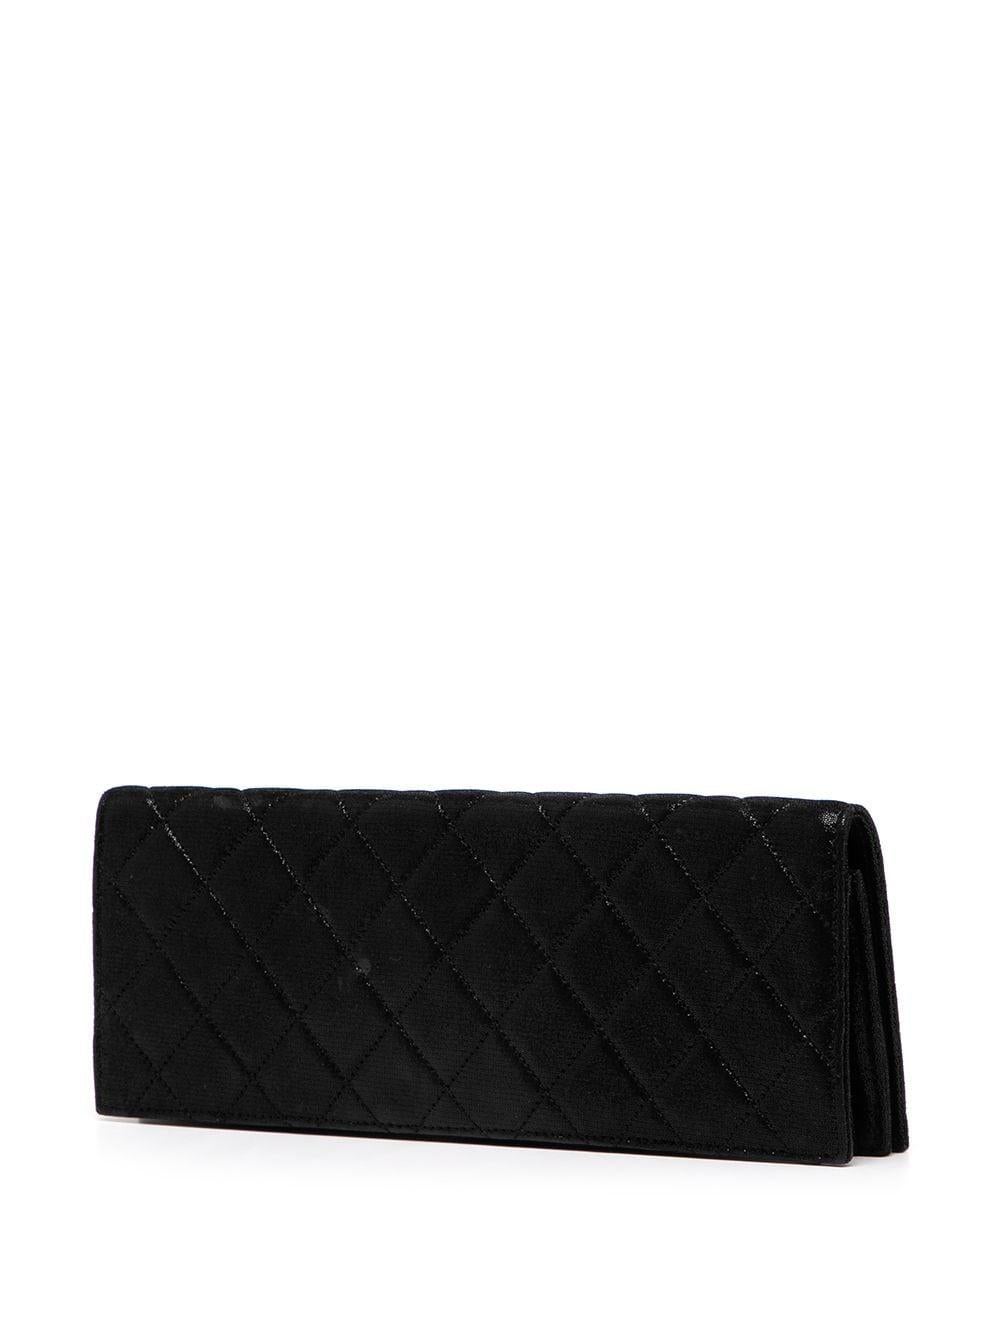 Black Chanel Quilted CC Diamante Clutch Bag